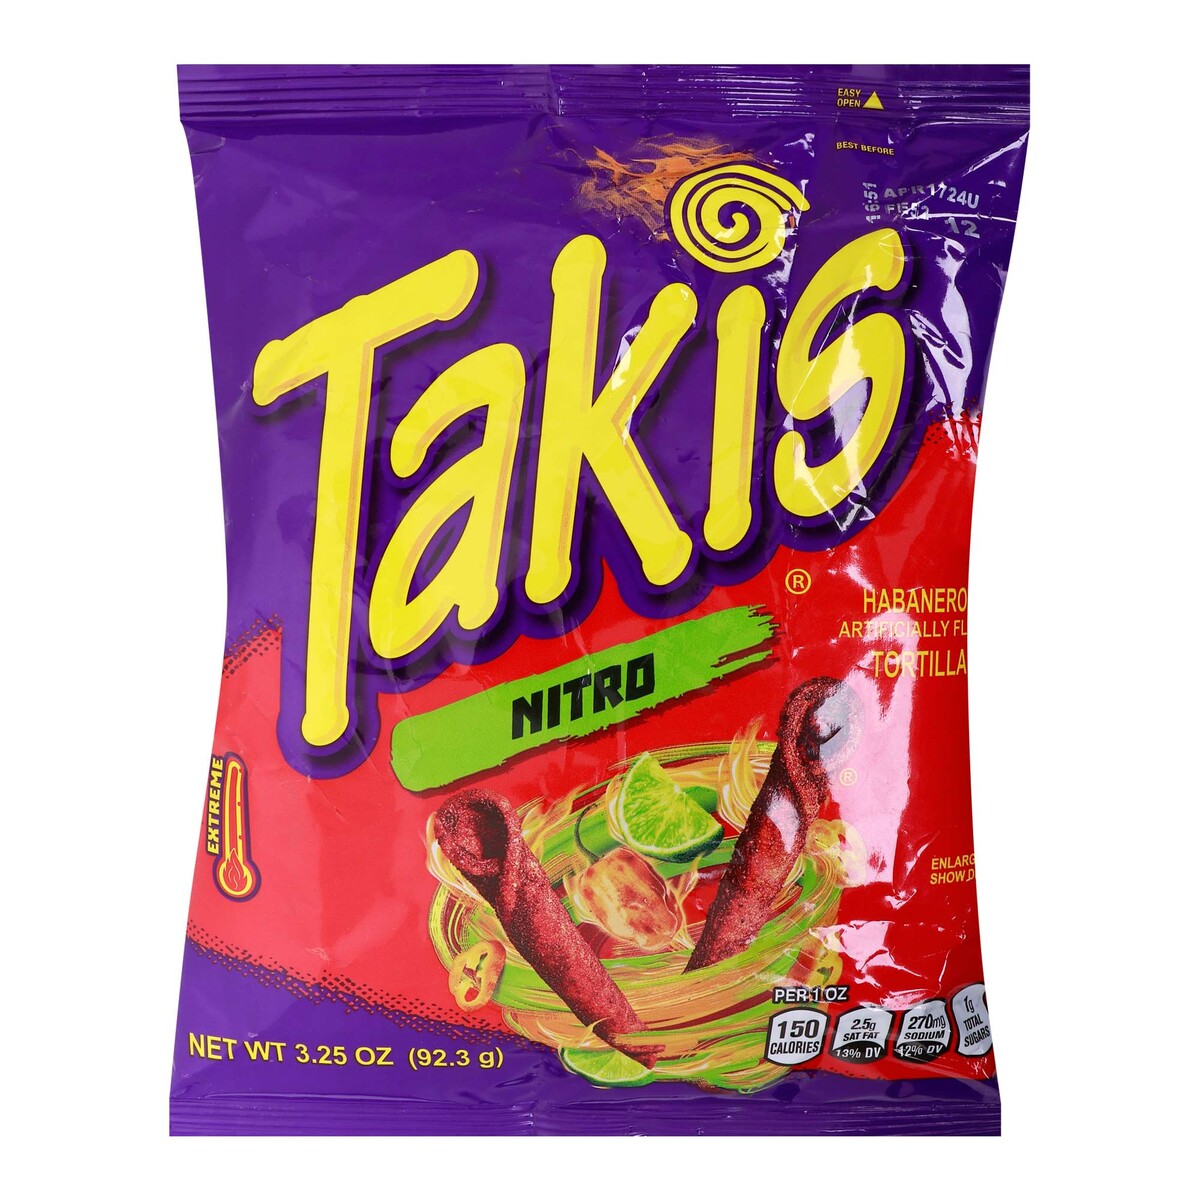 Takis Nitro Habanero & Lime Artificially Flavoured Tortilla Chips 92.3 g